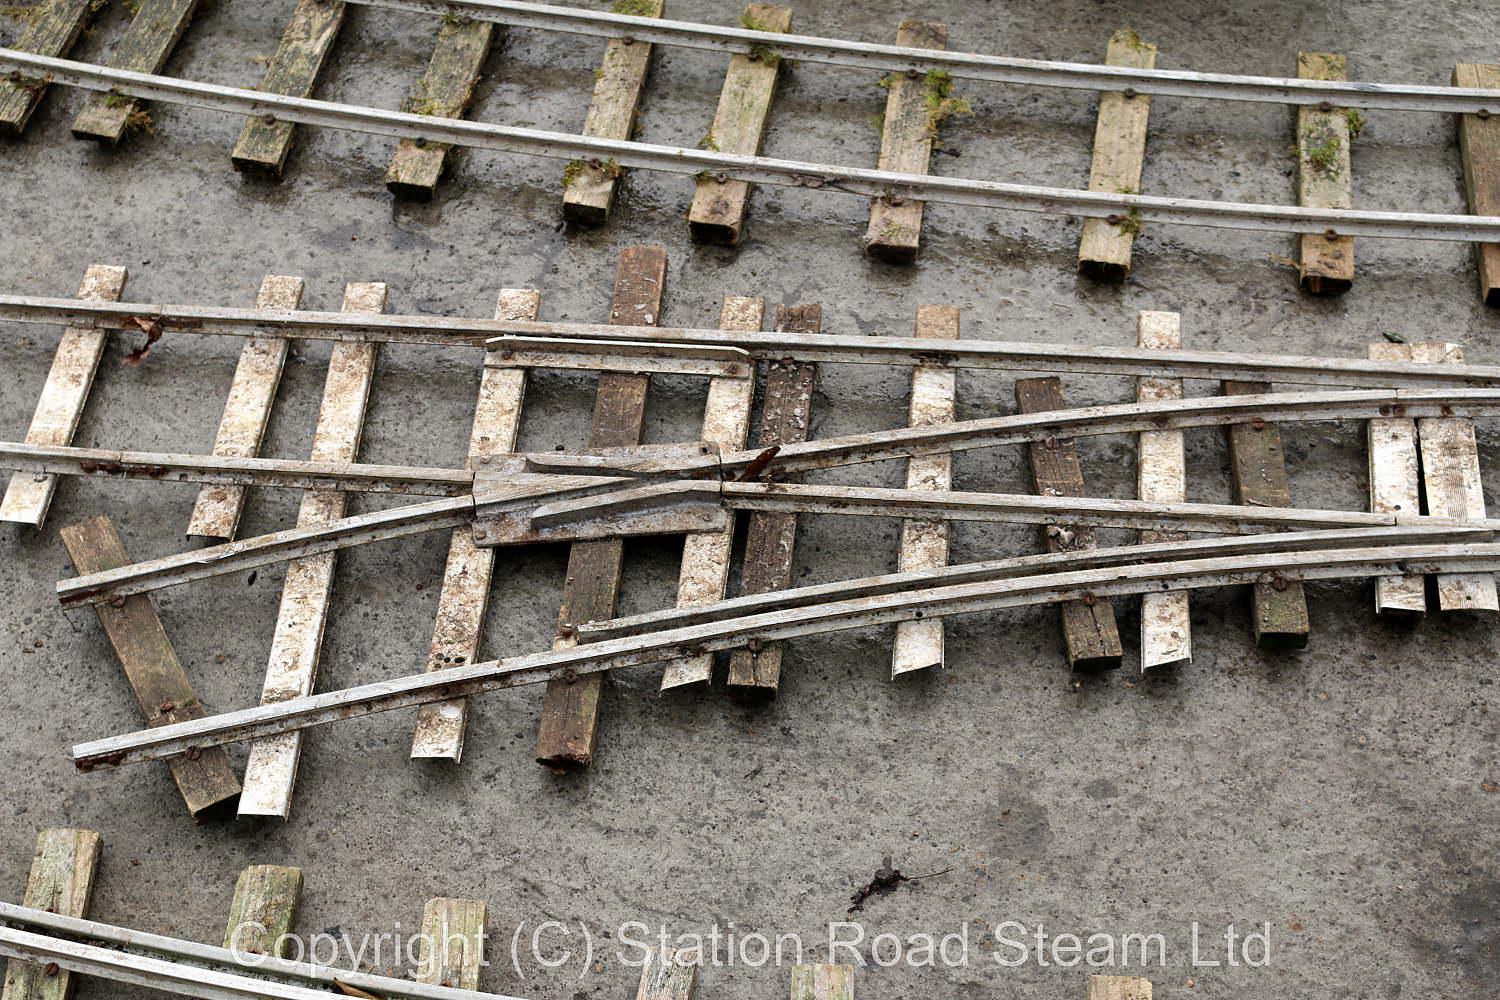 Quantity 5 inch gauge track with four turnouts